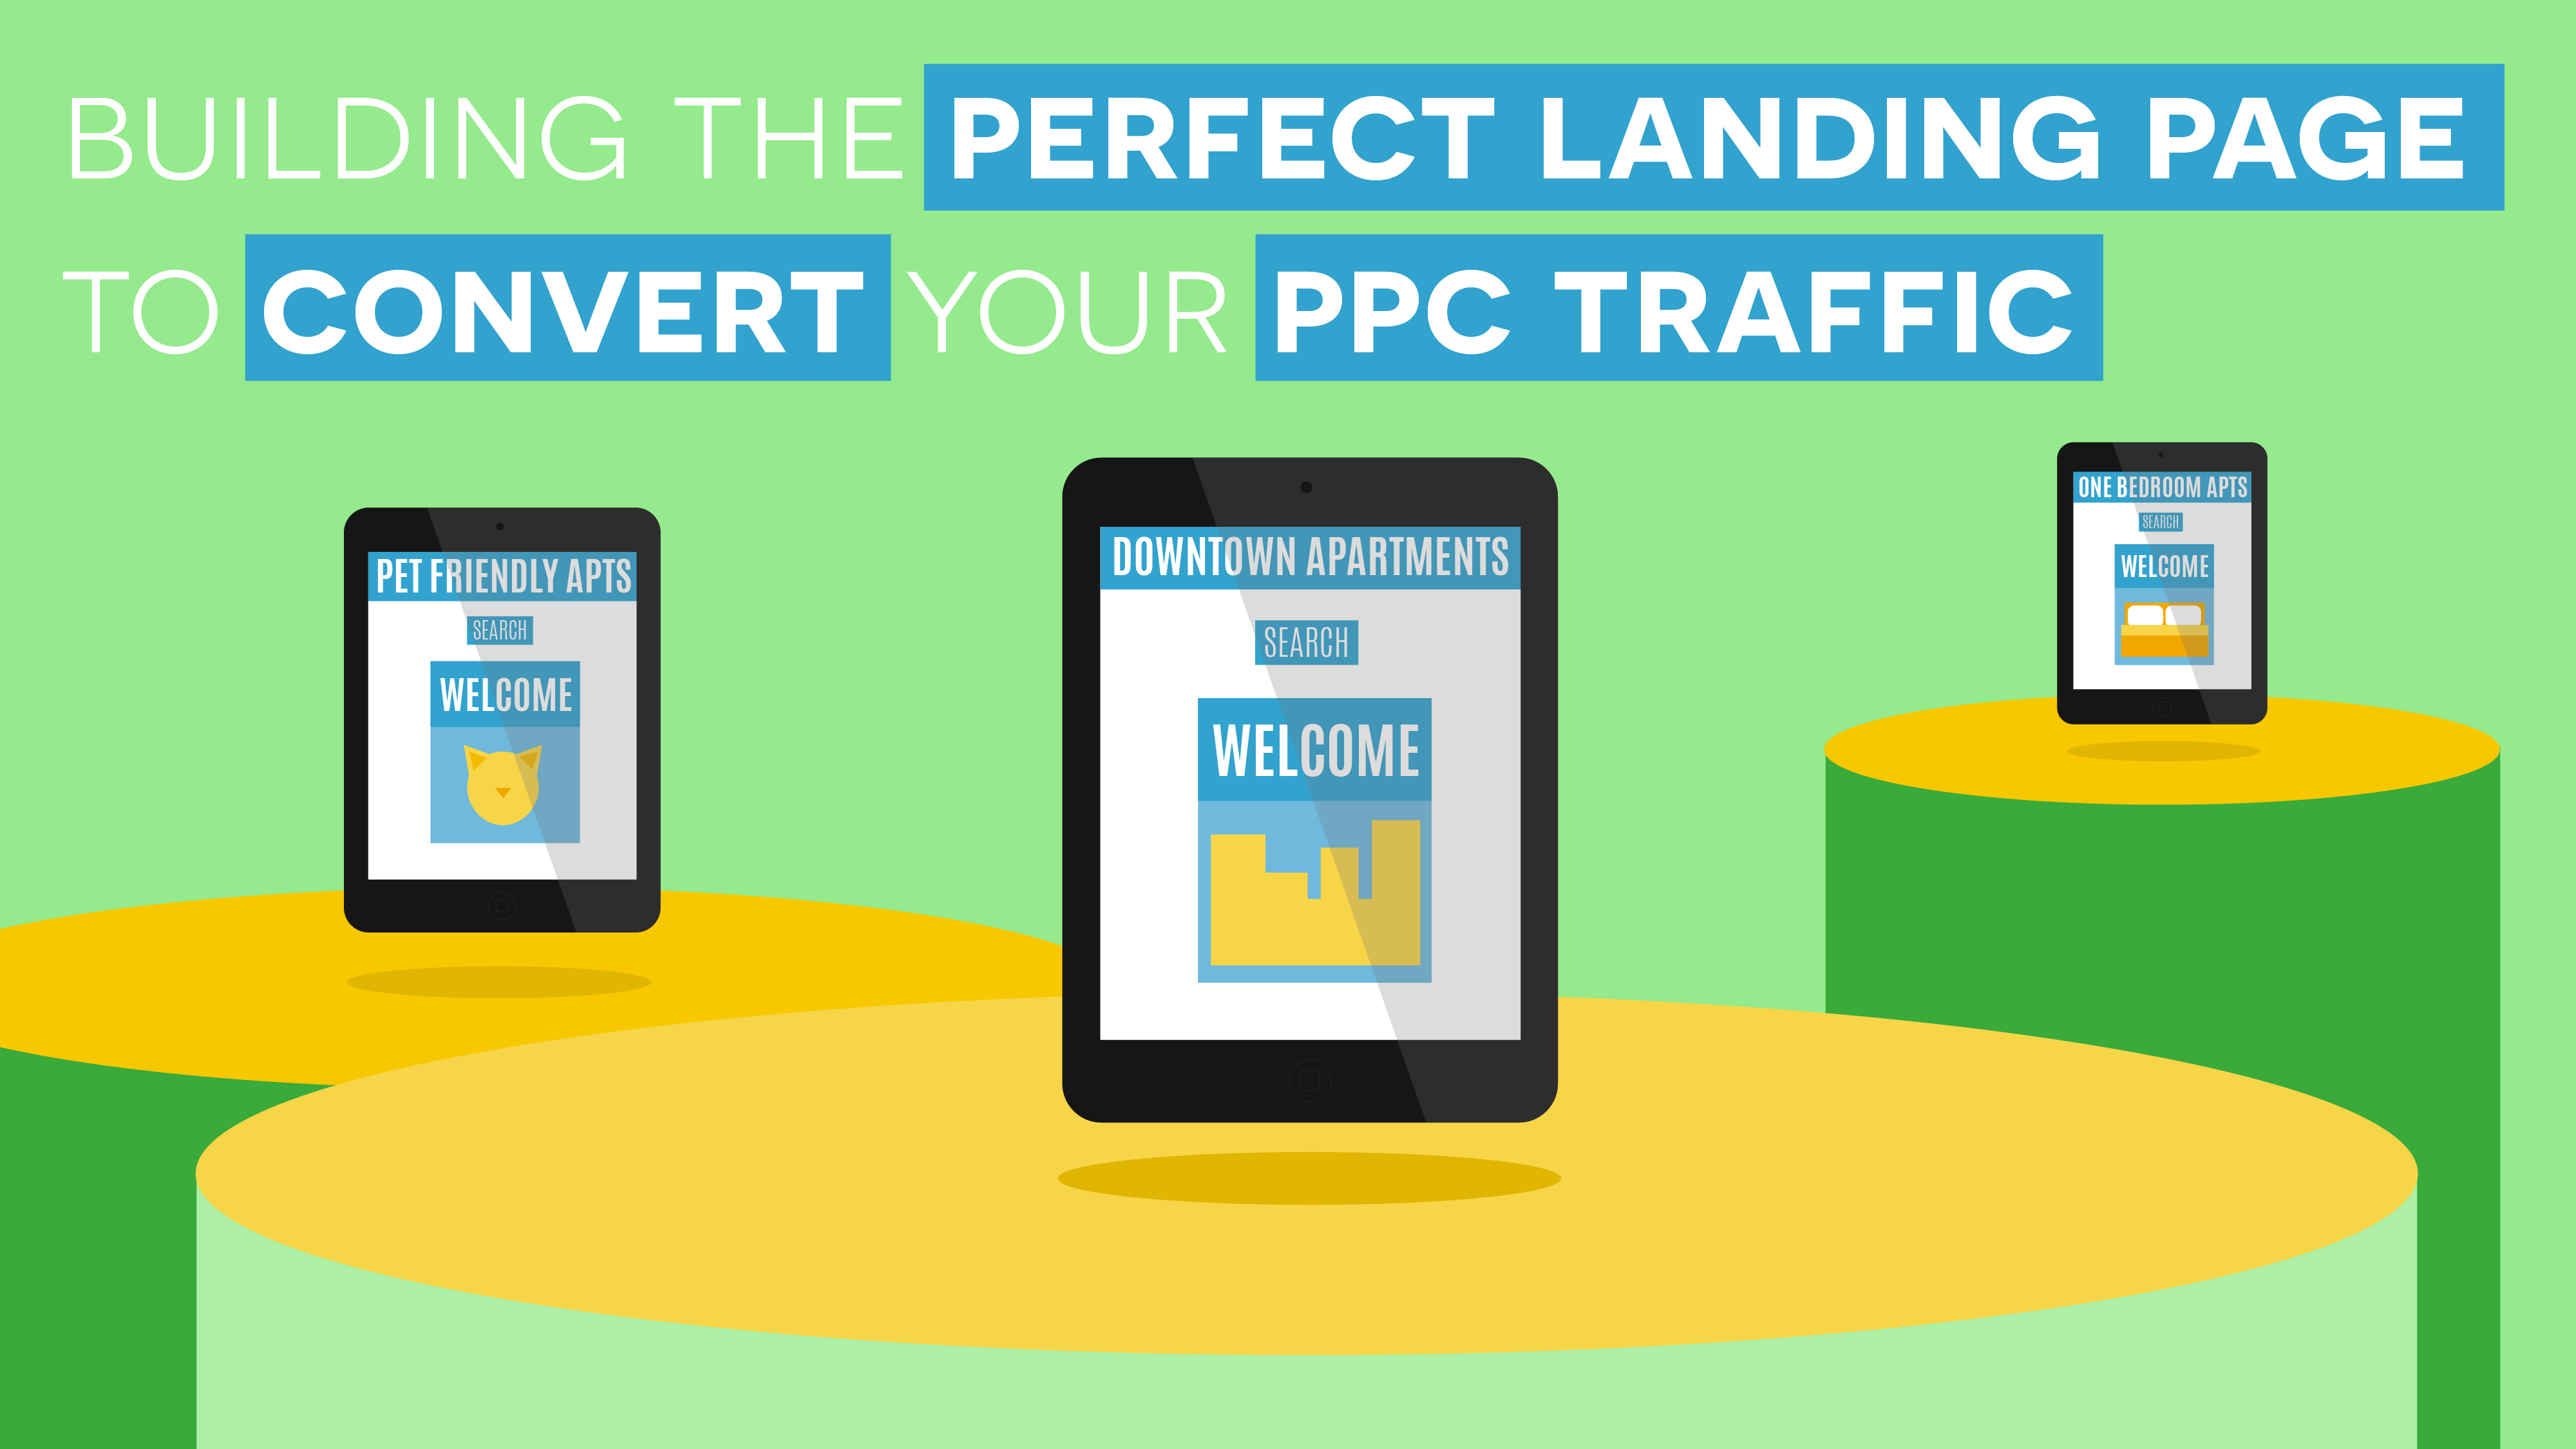 Building the Perfect Landing Page to Convert Your Community’s PPC Traffic